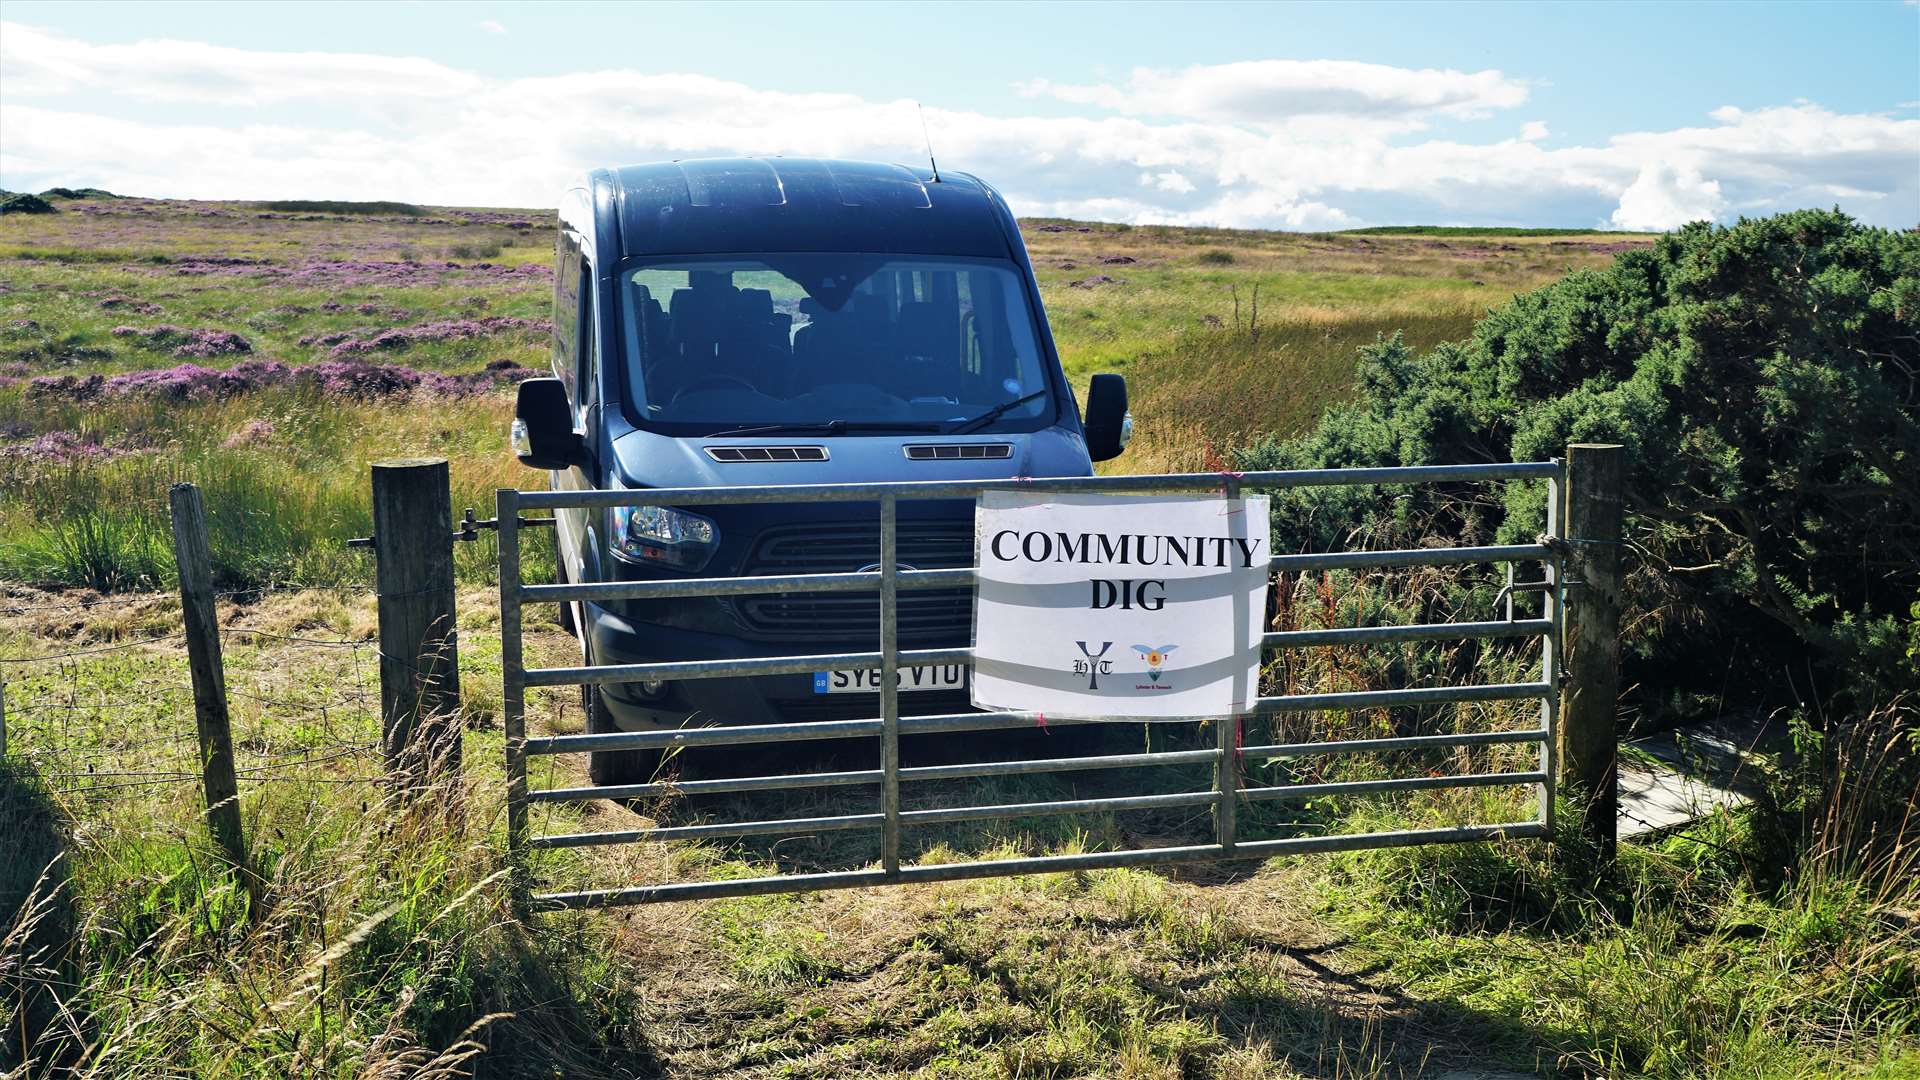 Entrance to the site is via this gate on the Tannach road and a path cut into moorland. Picture: DGS